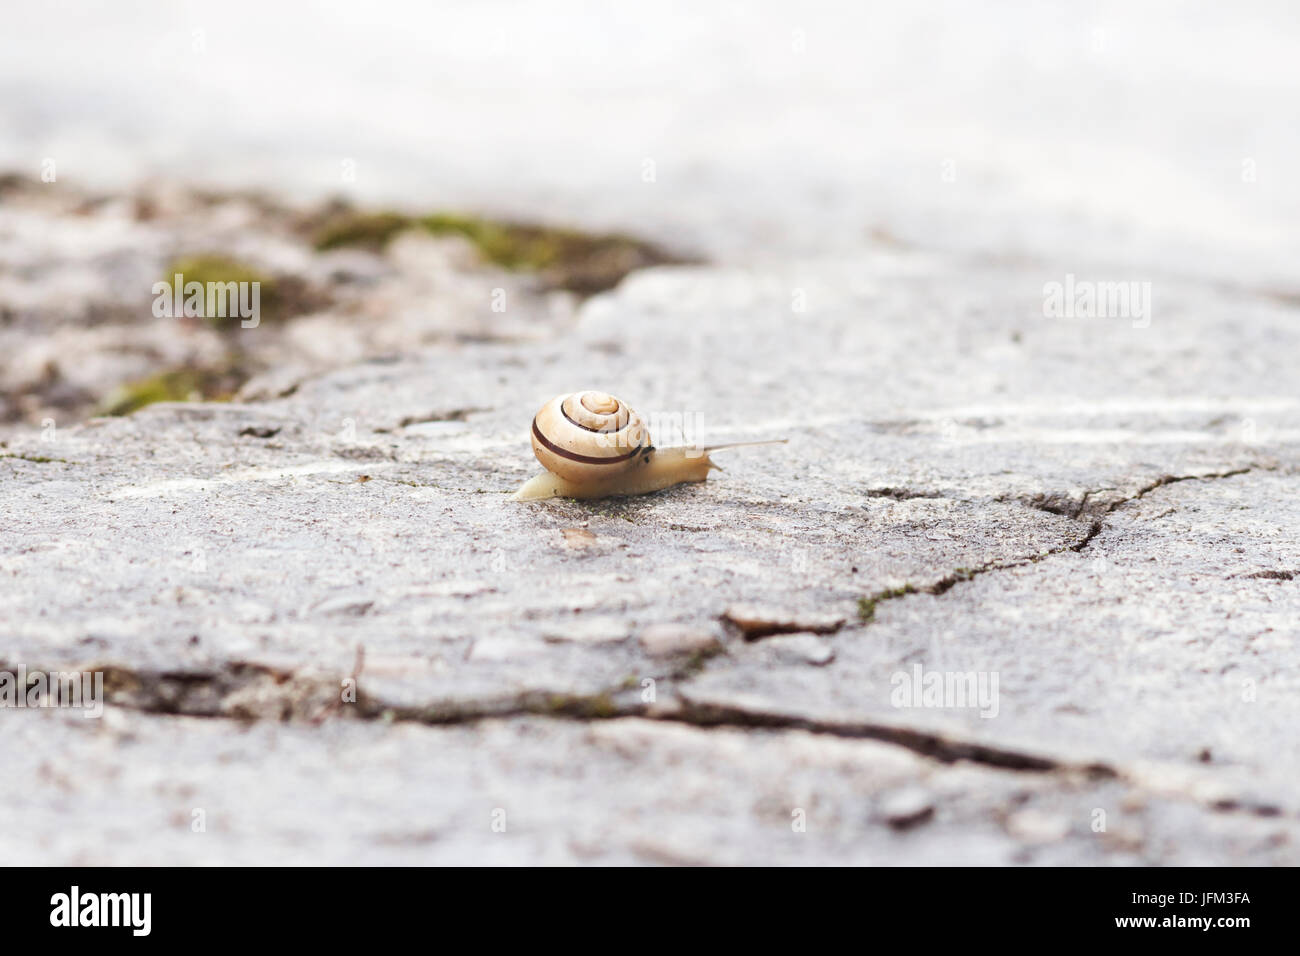 Snail crawling on the rough and wet concrete yard macro photography Stock Photo